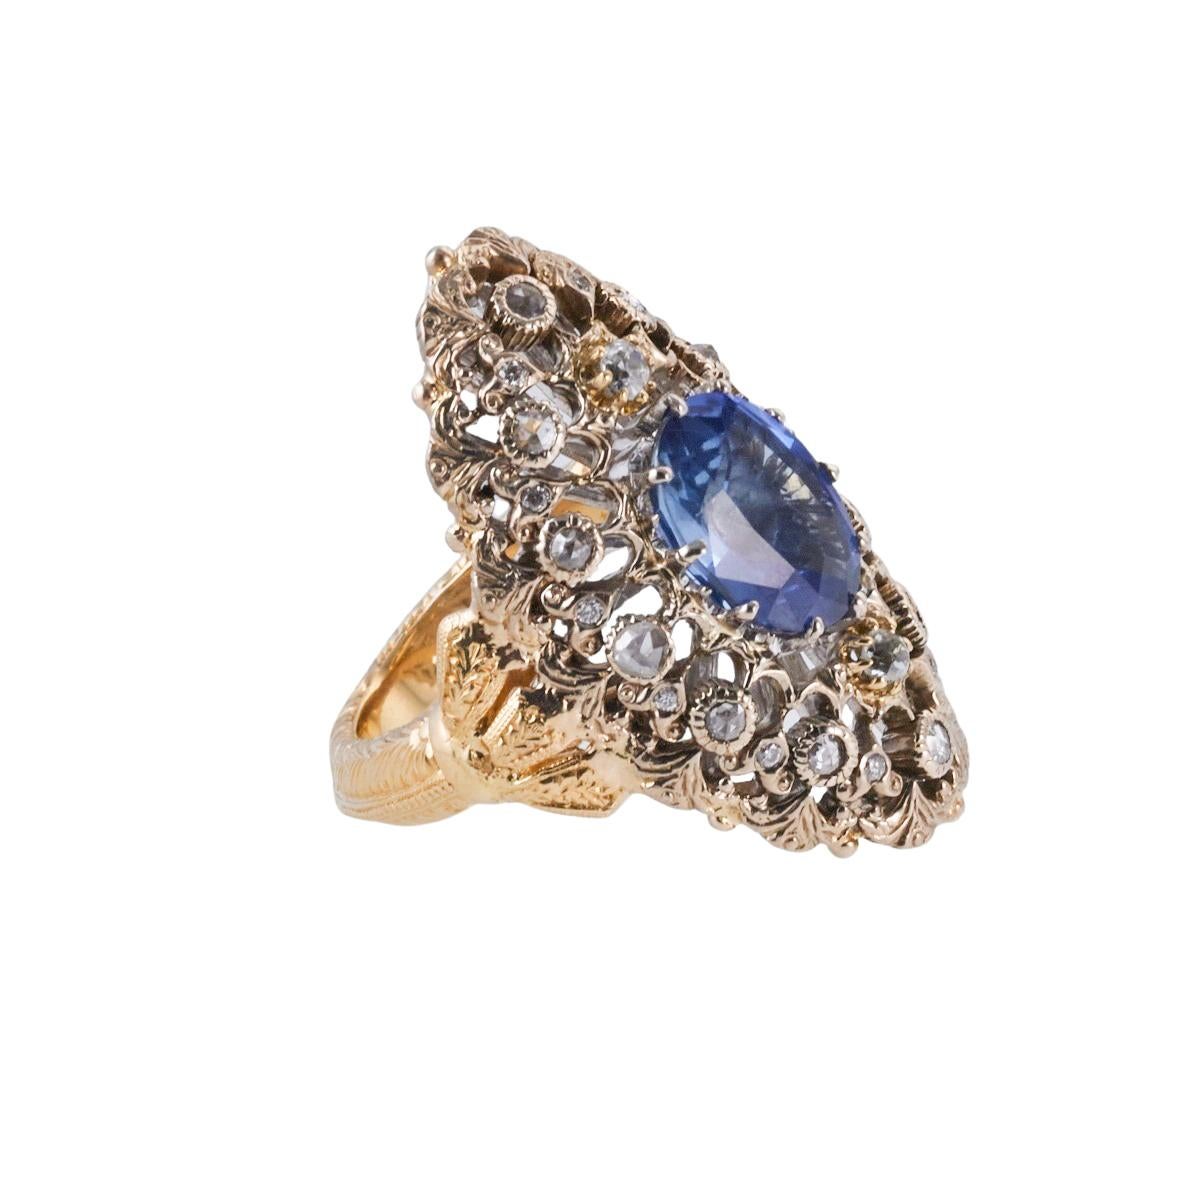 18k white and yellow gold ring by Mario Buccellati, set with center oval blue sapphire ( measures approx. 11 x 8.7mm , as allowed by the setting), surrounded with approx. 0.40ctw in diamonds. Ring size 5.25, top is 33mm x 20mm. Marked M. Buccellati,